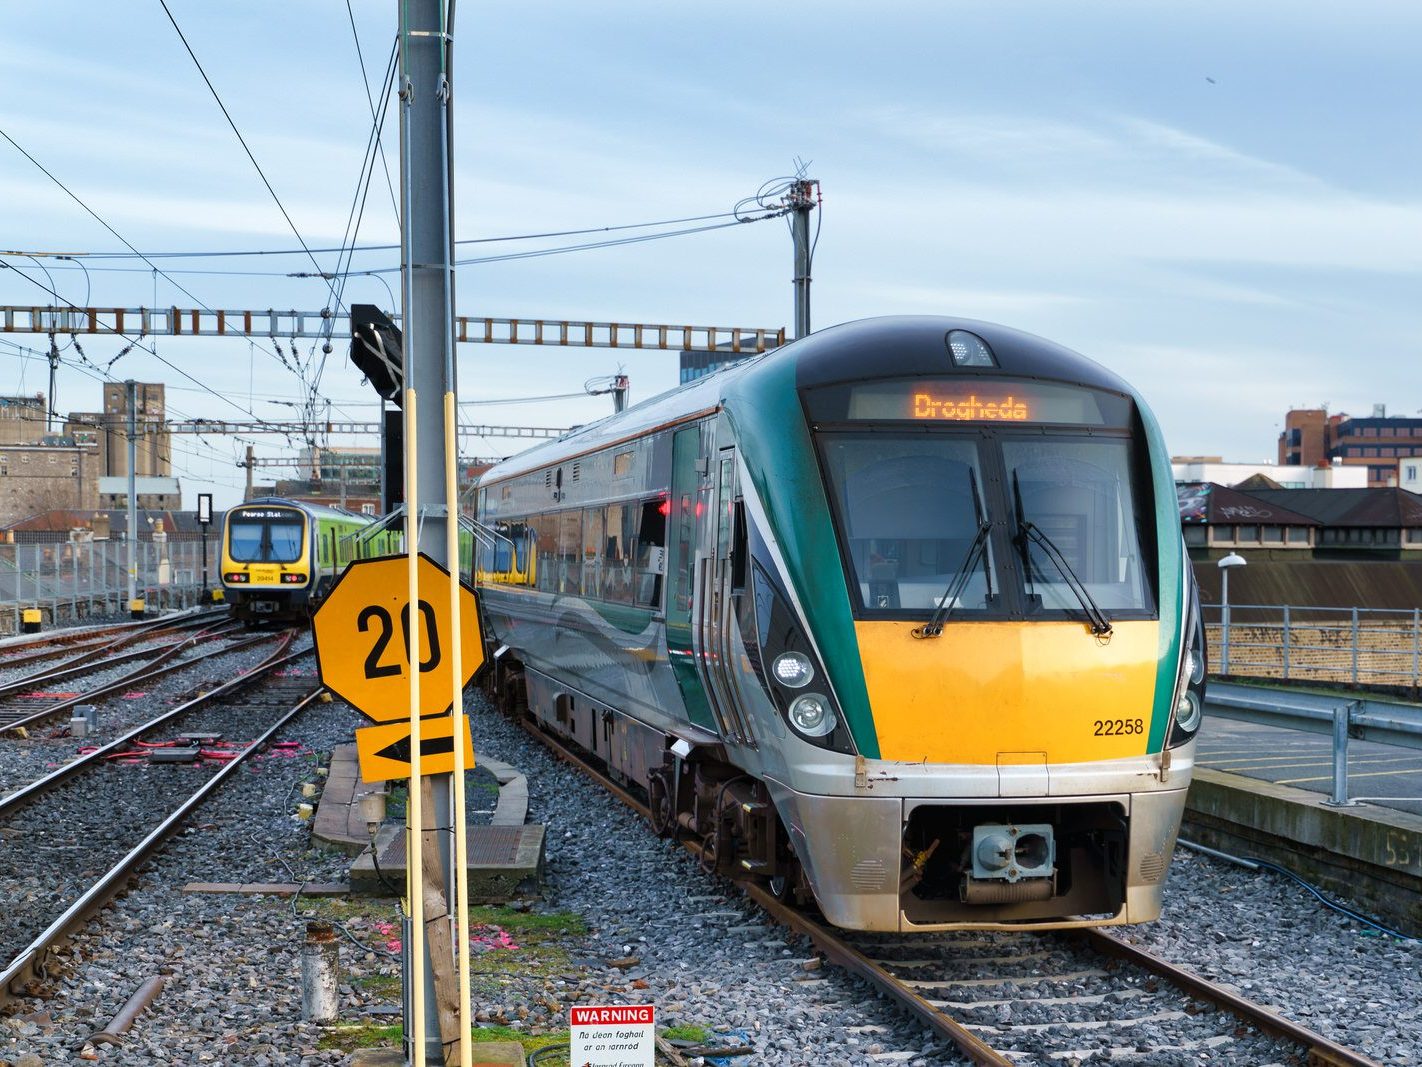 PEARSE STATION AS IT WAS [FEBRUARY 2016]-233975-1